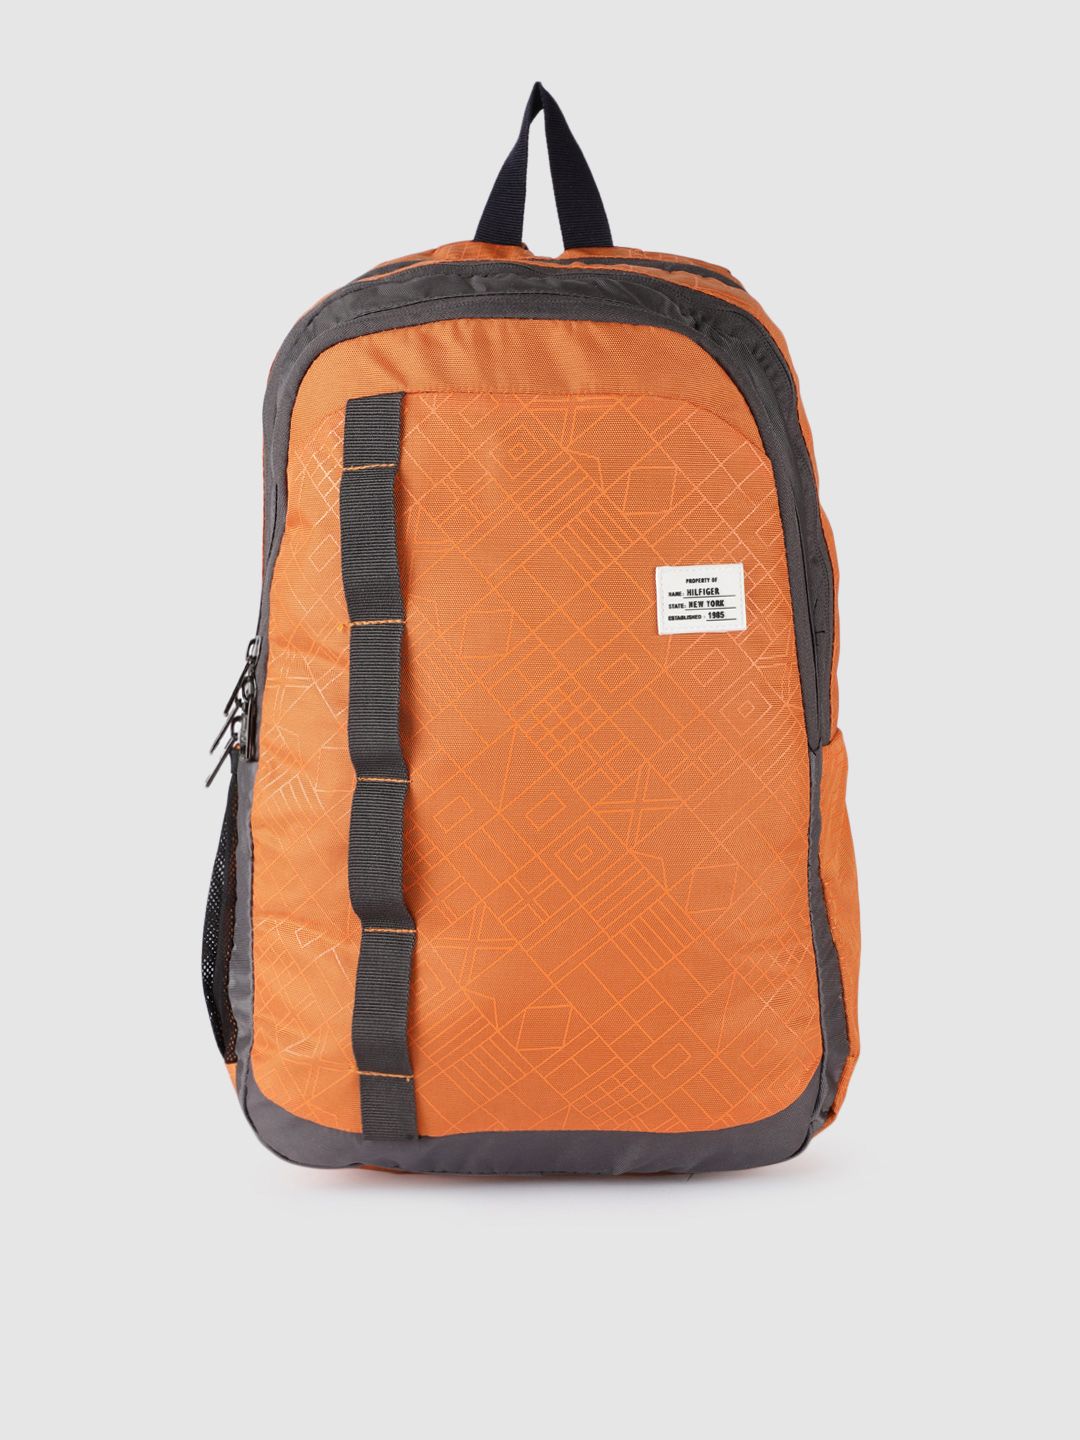 Tommy Hilfiger Unisex Orange Graphic Backpack Price in India